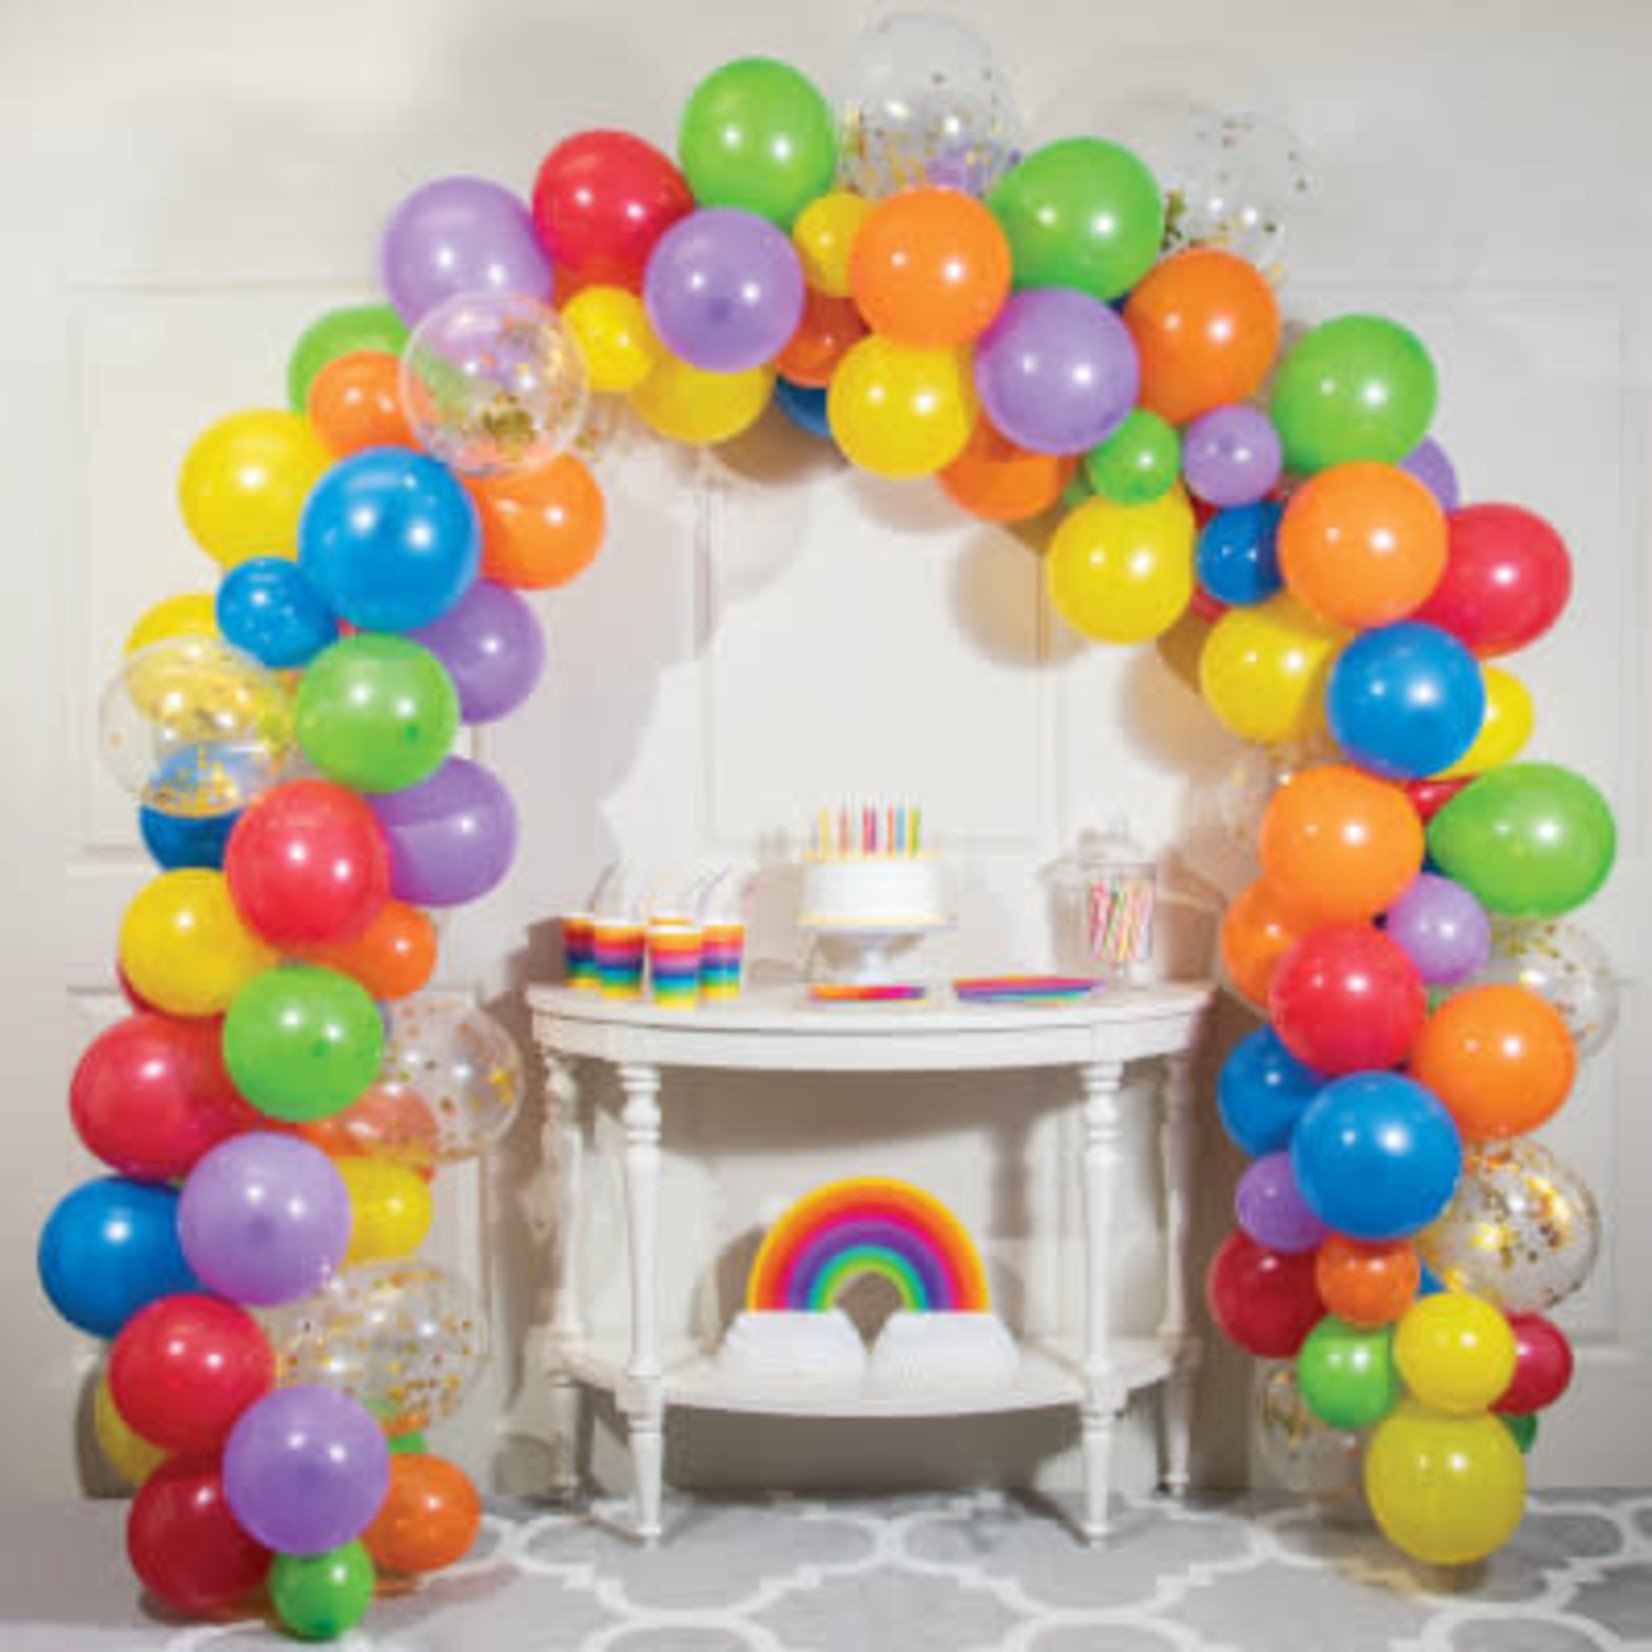 Creative Converting Rainbow Balloon Arch Kit - 16ft. (Balloons Included)